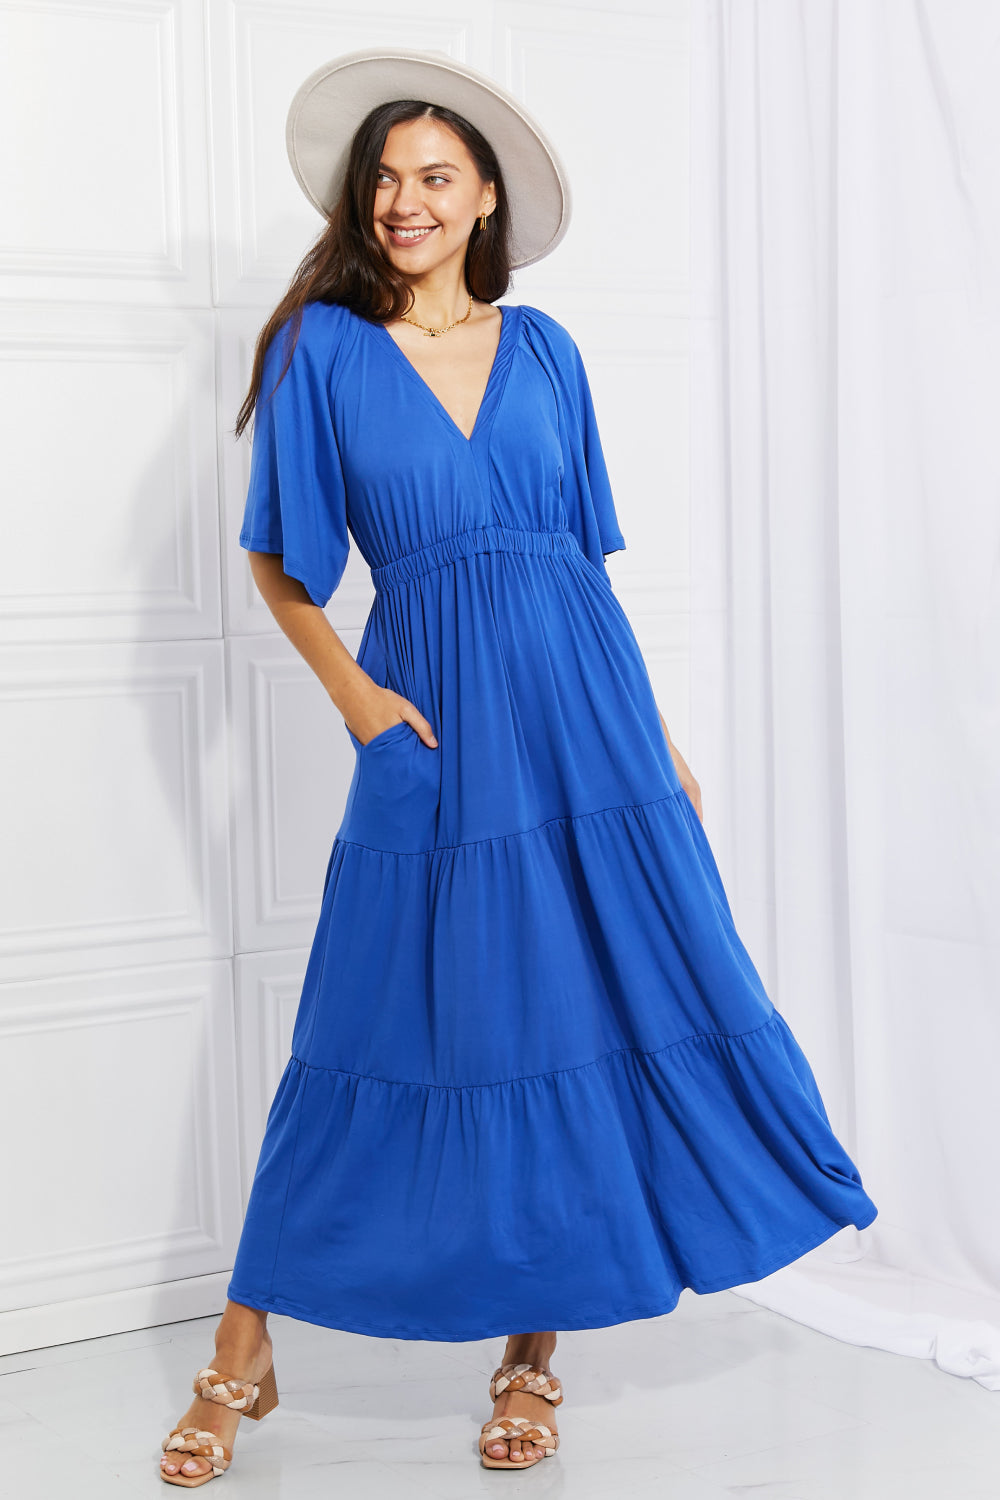 My Muse Flare Sleeve Tiered Maxi Dress Small-3XL